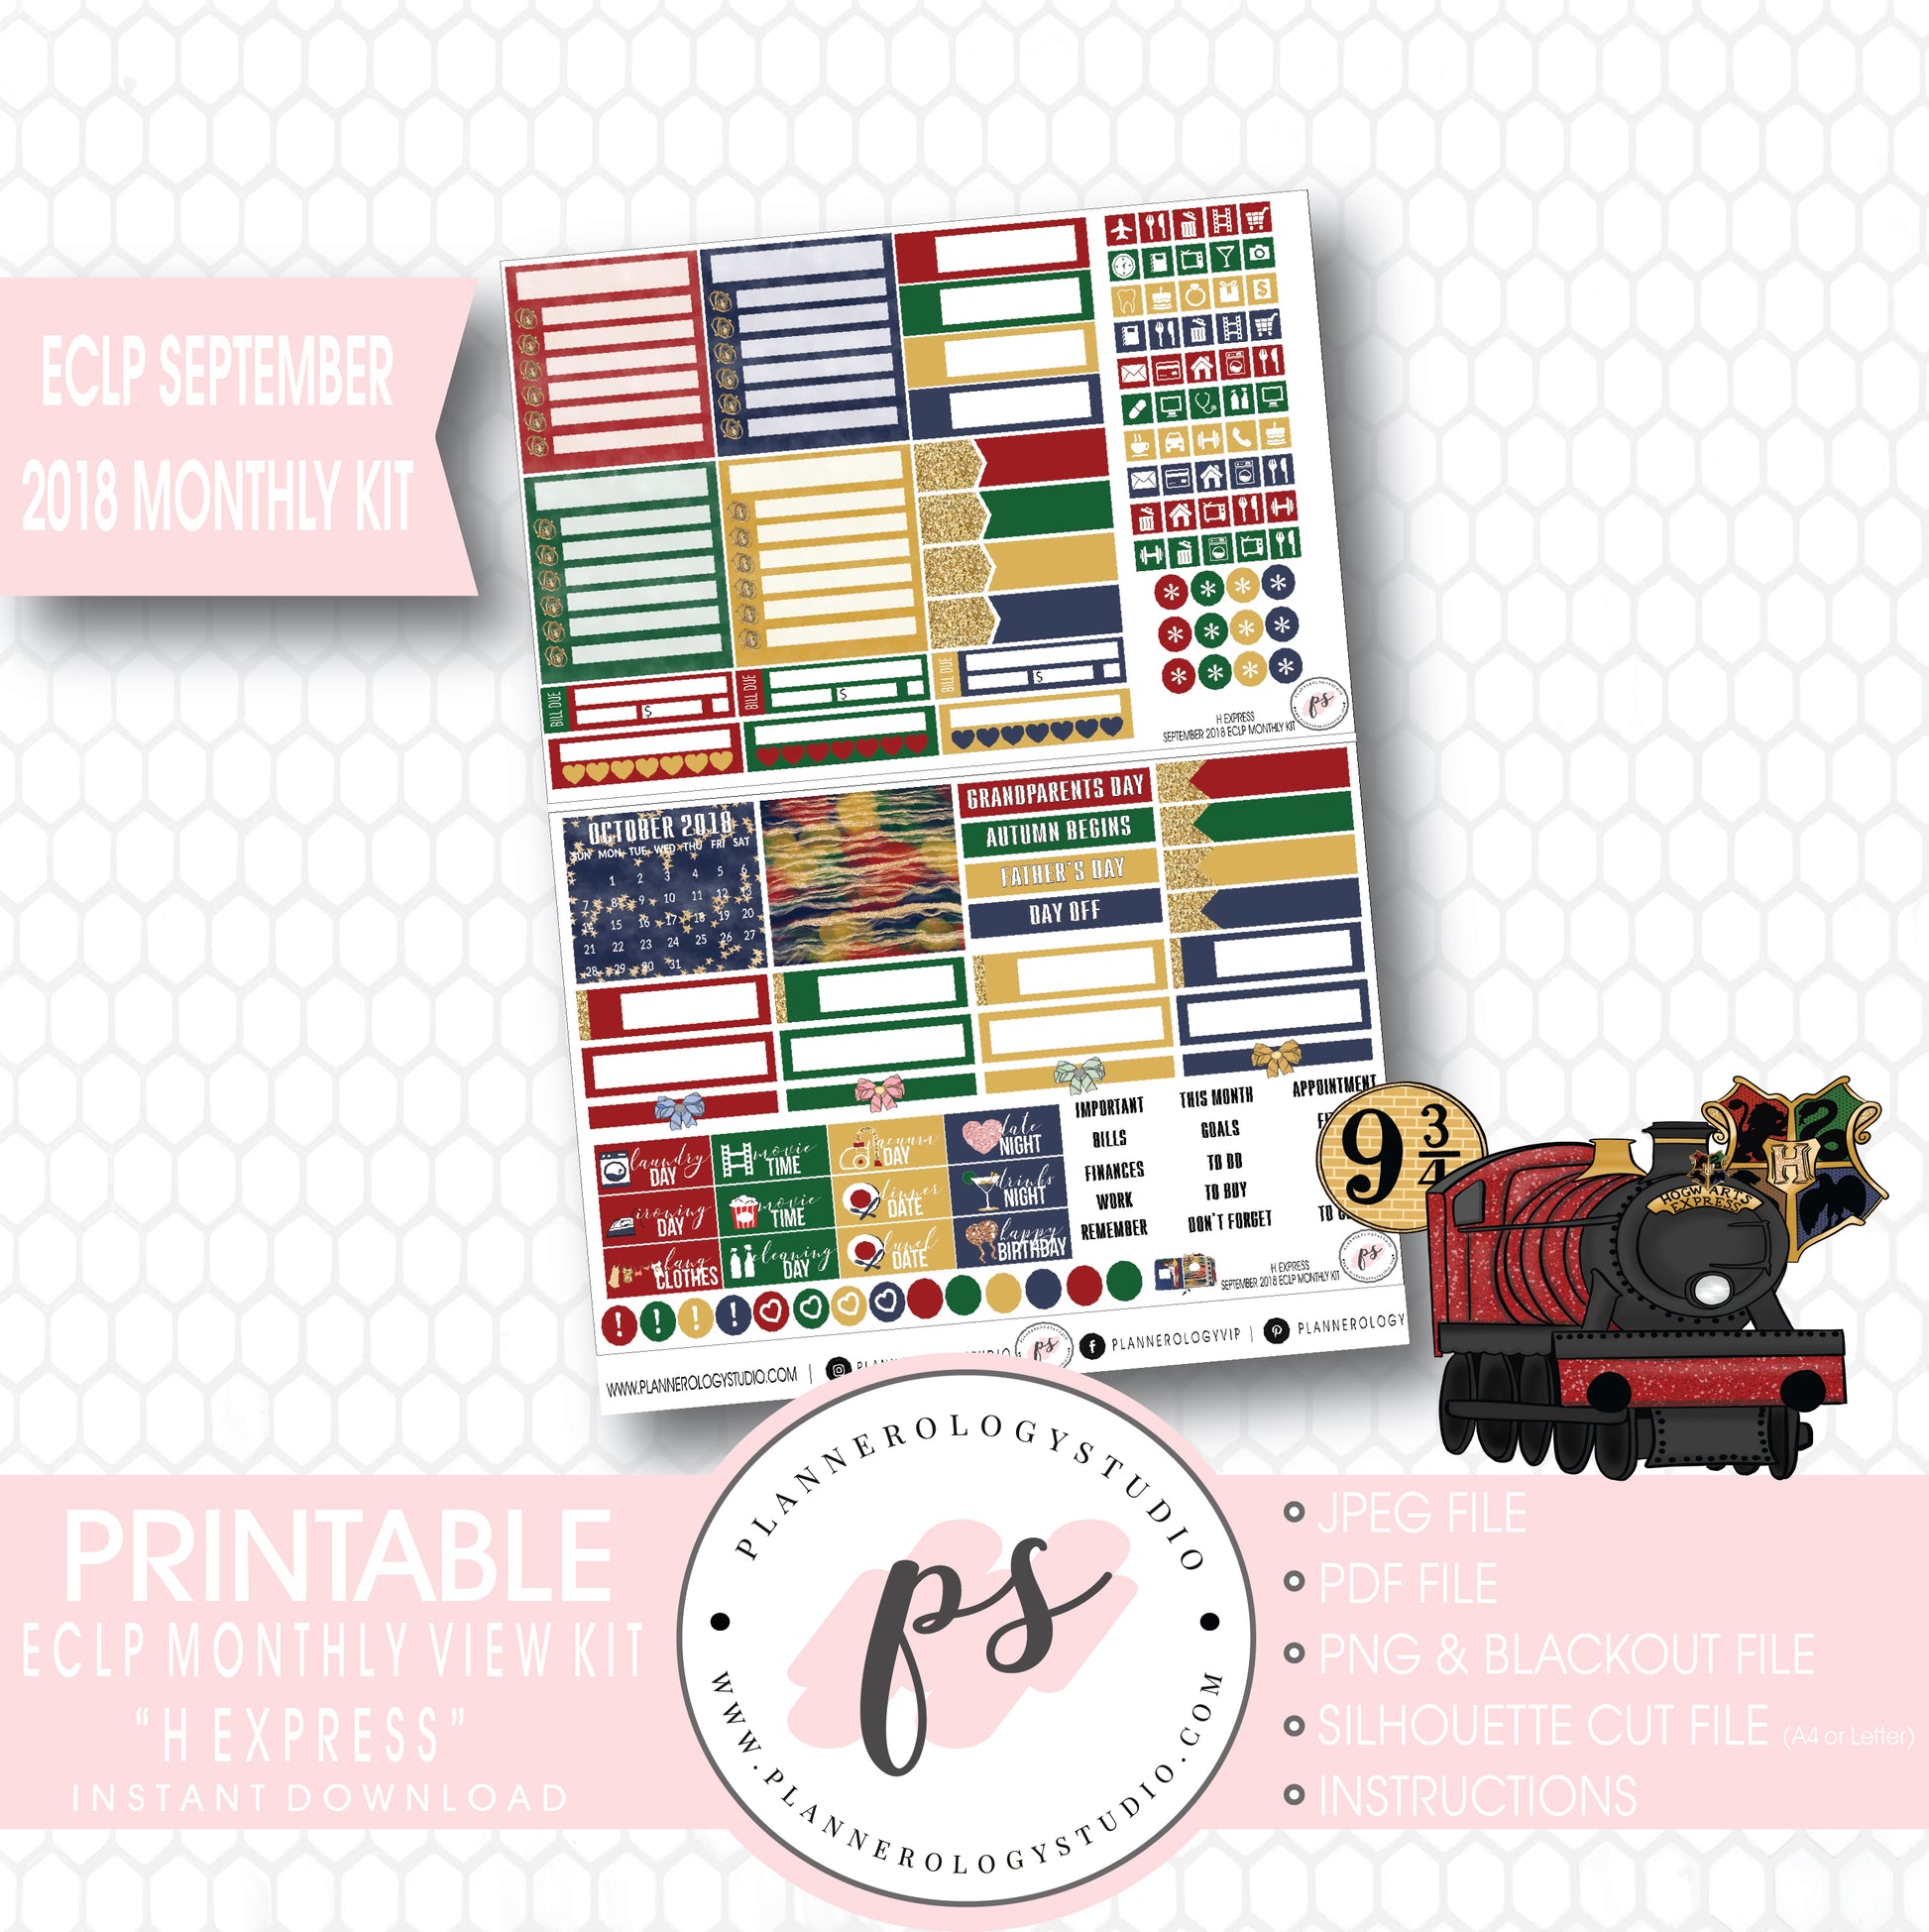 H Express (Harry Potter) September 2018 Monthly View Kit Digital Printable Planner Stickers (for use with Erin Condren) - Plannerologystudio